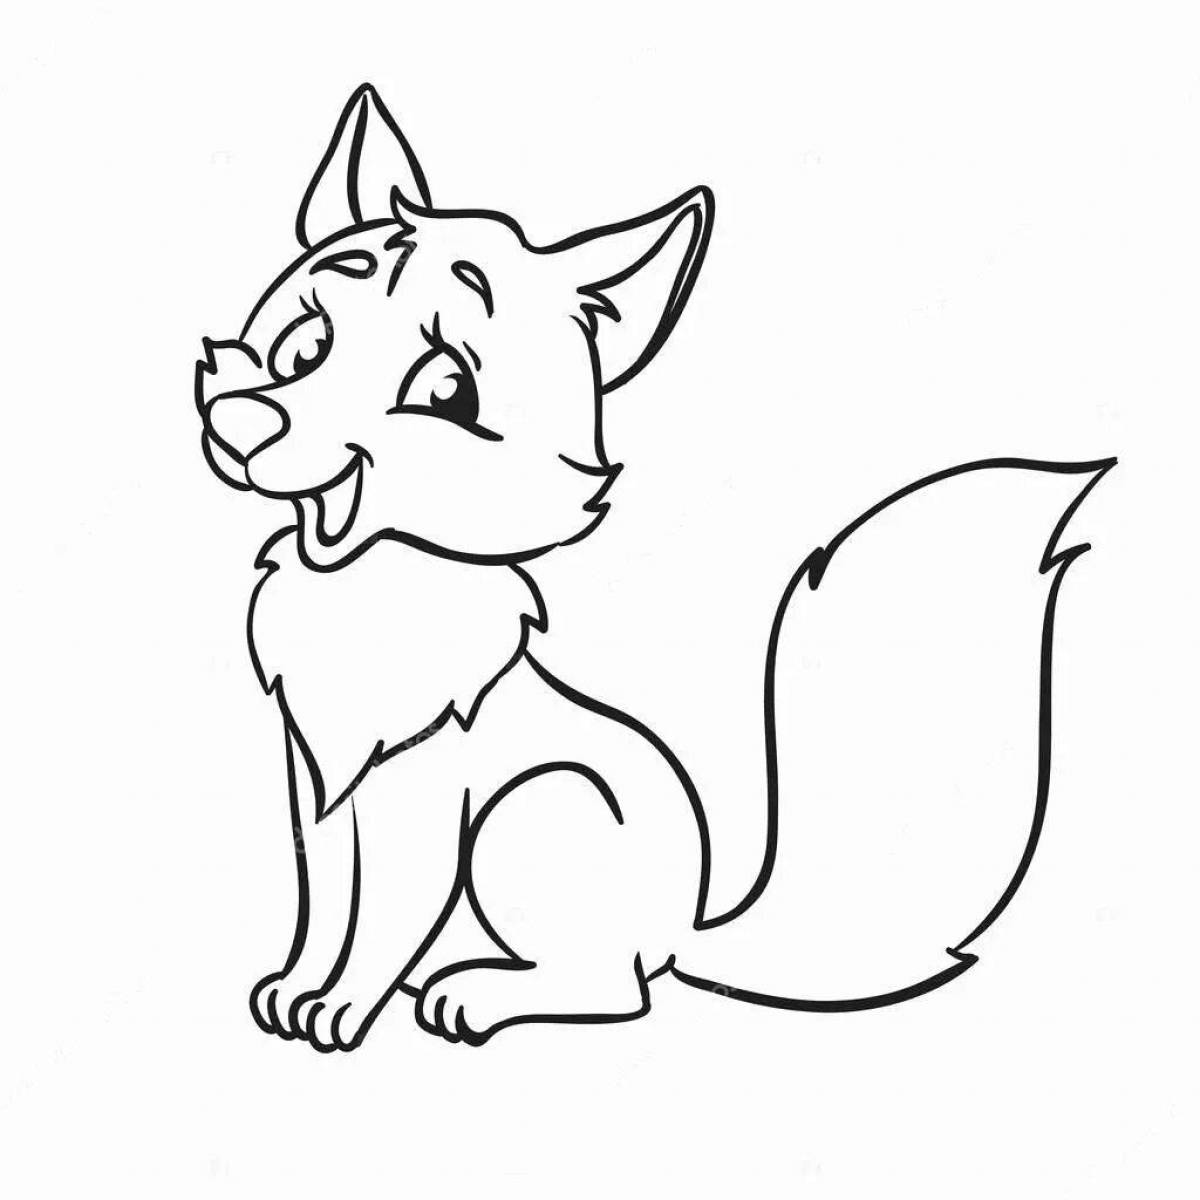 Fun drawing of a fox for kids